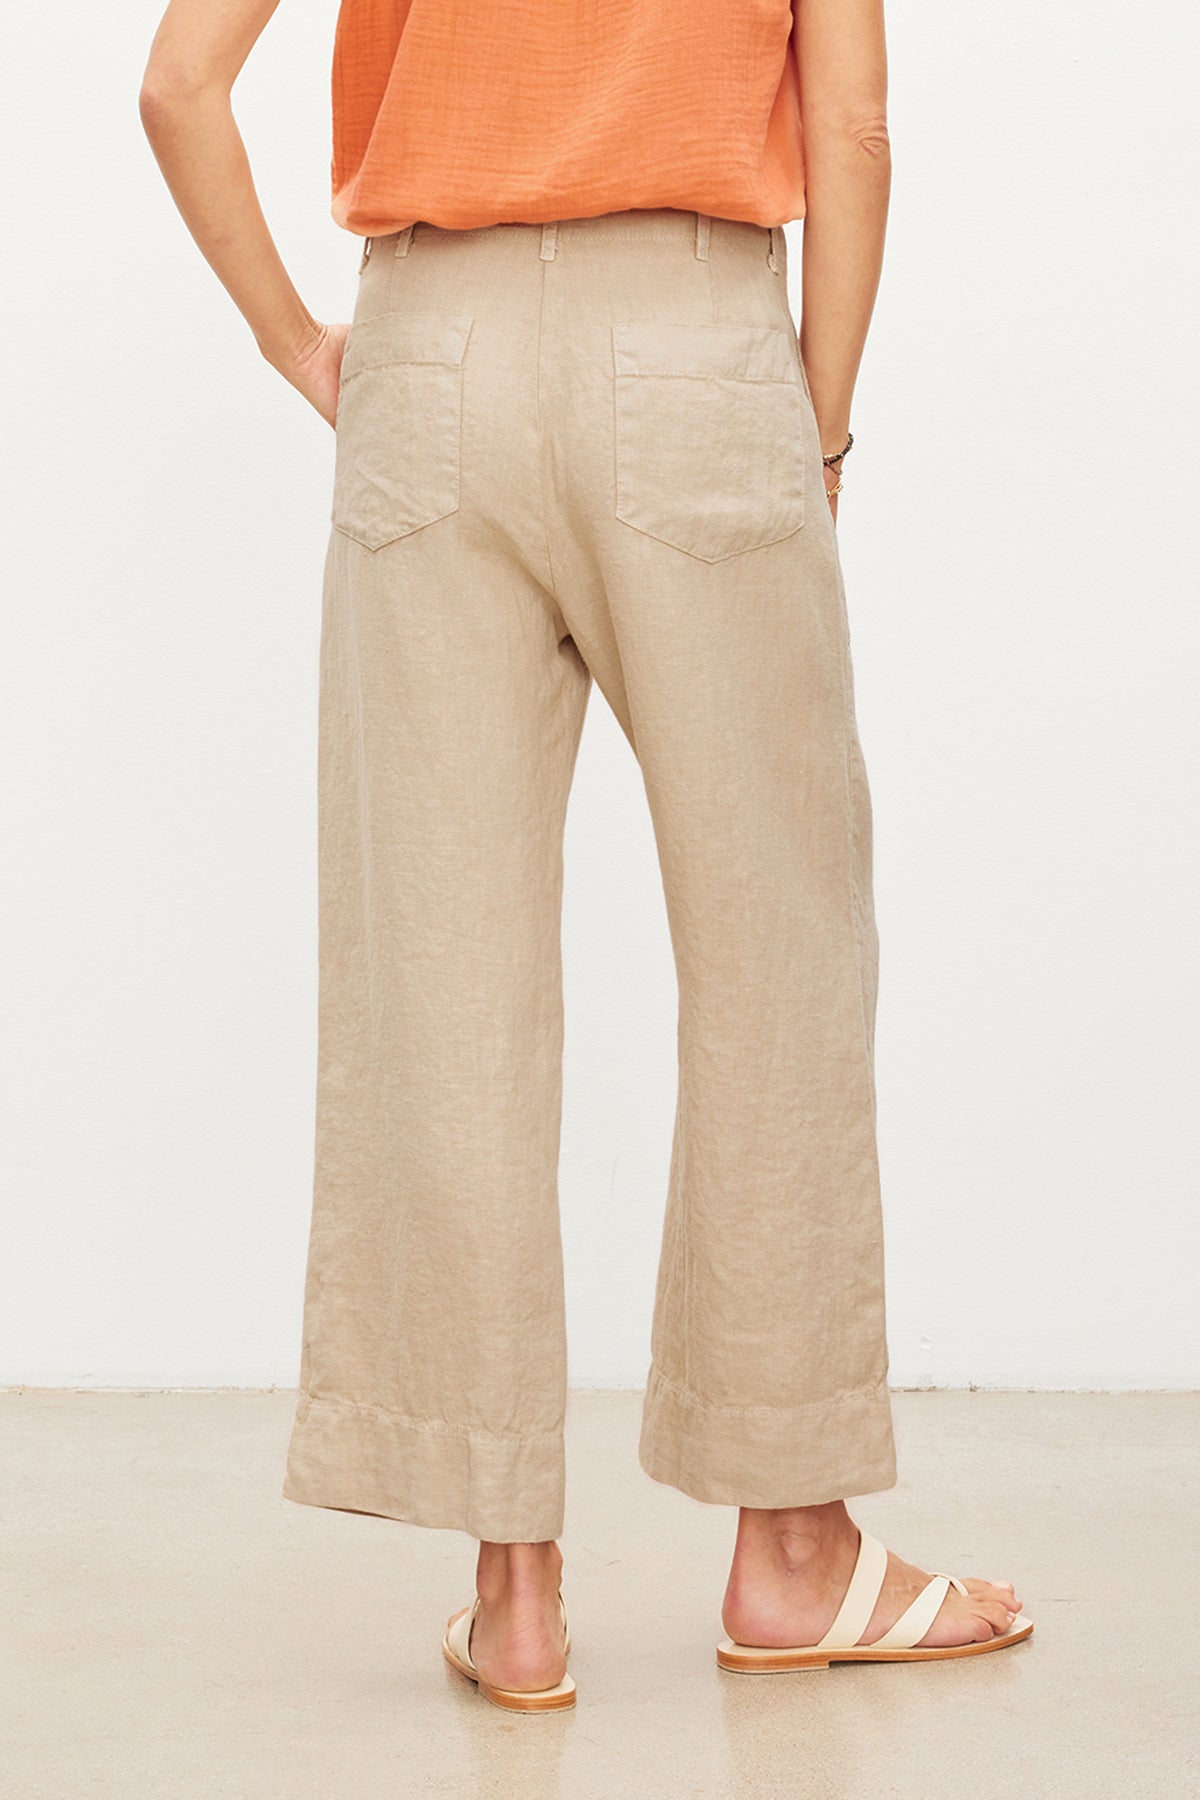 Person standing in a neutral pose wearing Velvet by Graham & Spencer DRU Heavy Linen Pant with patch pockets and light-colored sandals, with a partial view of an orange top.-36247918543041